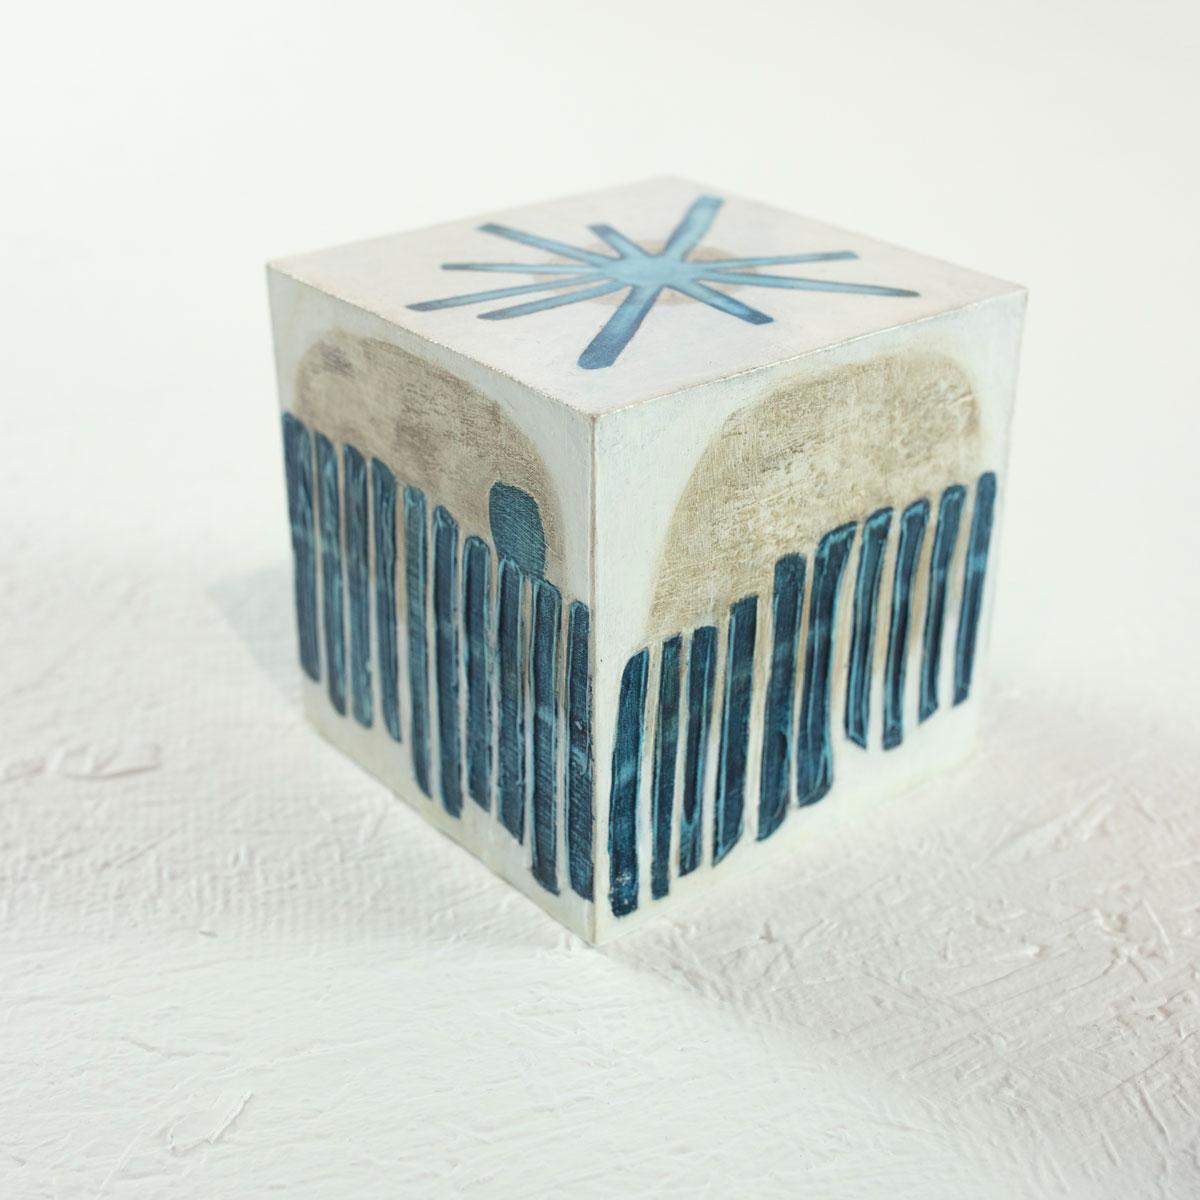 This 4" hand-painted sculptural cube by Sofie Swann is made with acrylic paint and gesso on wood. It features a coastal blue, beige, and white palette, with organic forms and shapes, and light texture on the surface of the cube. It is signed by the